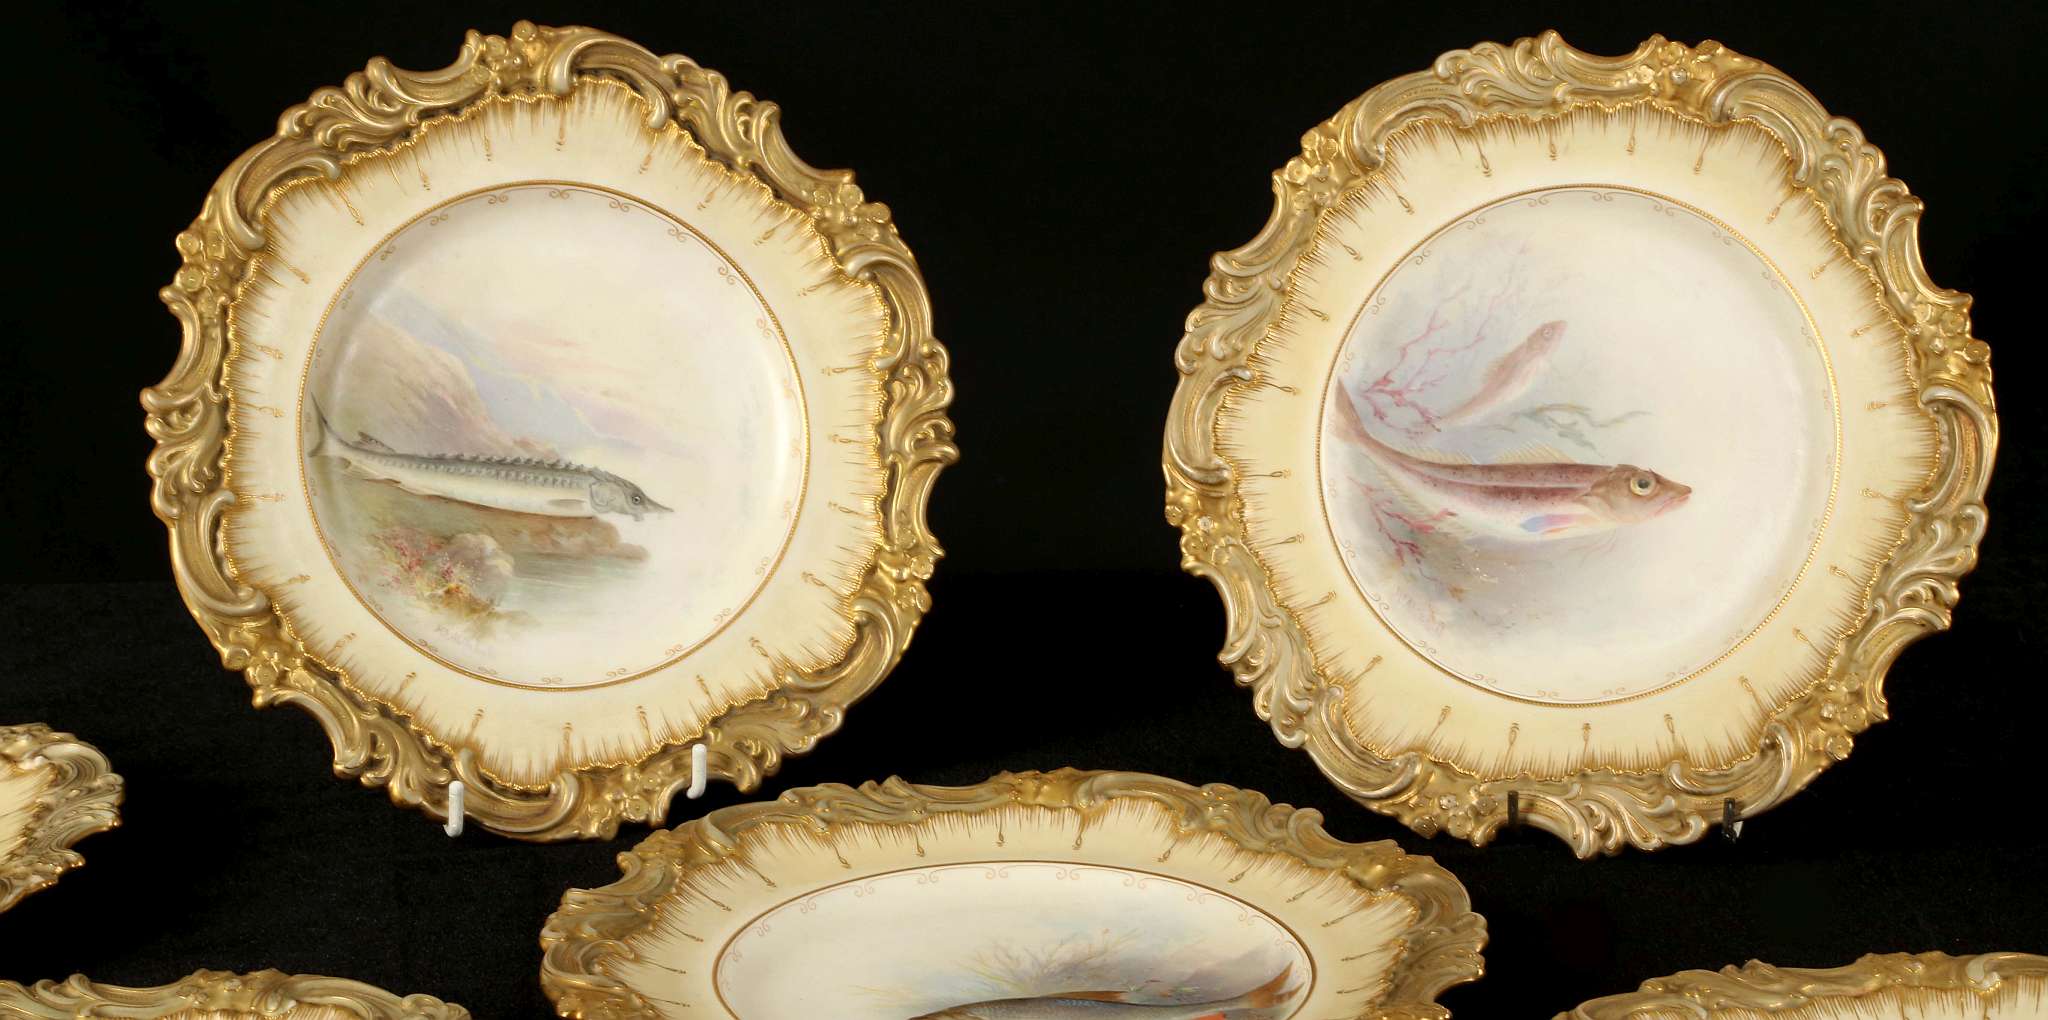 HENRY MITCHELL FOR DOULTON BURSLEM, circa 1900, a set of twelve cabinet plates finely painted with - Image 2 of 9